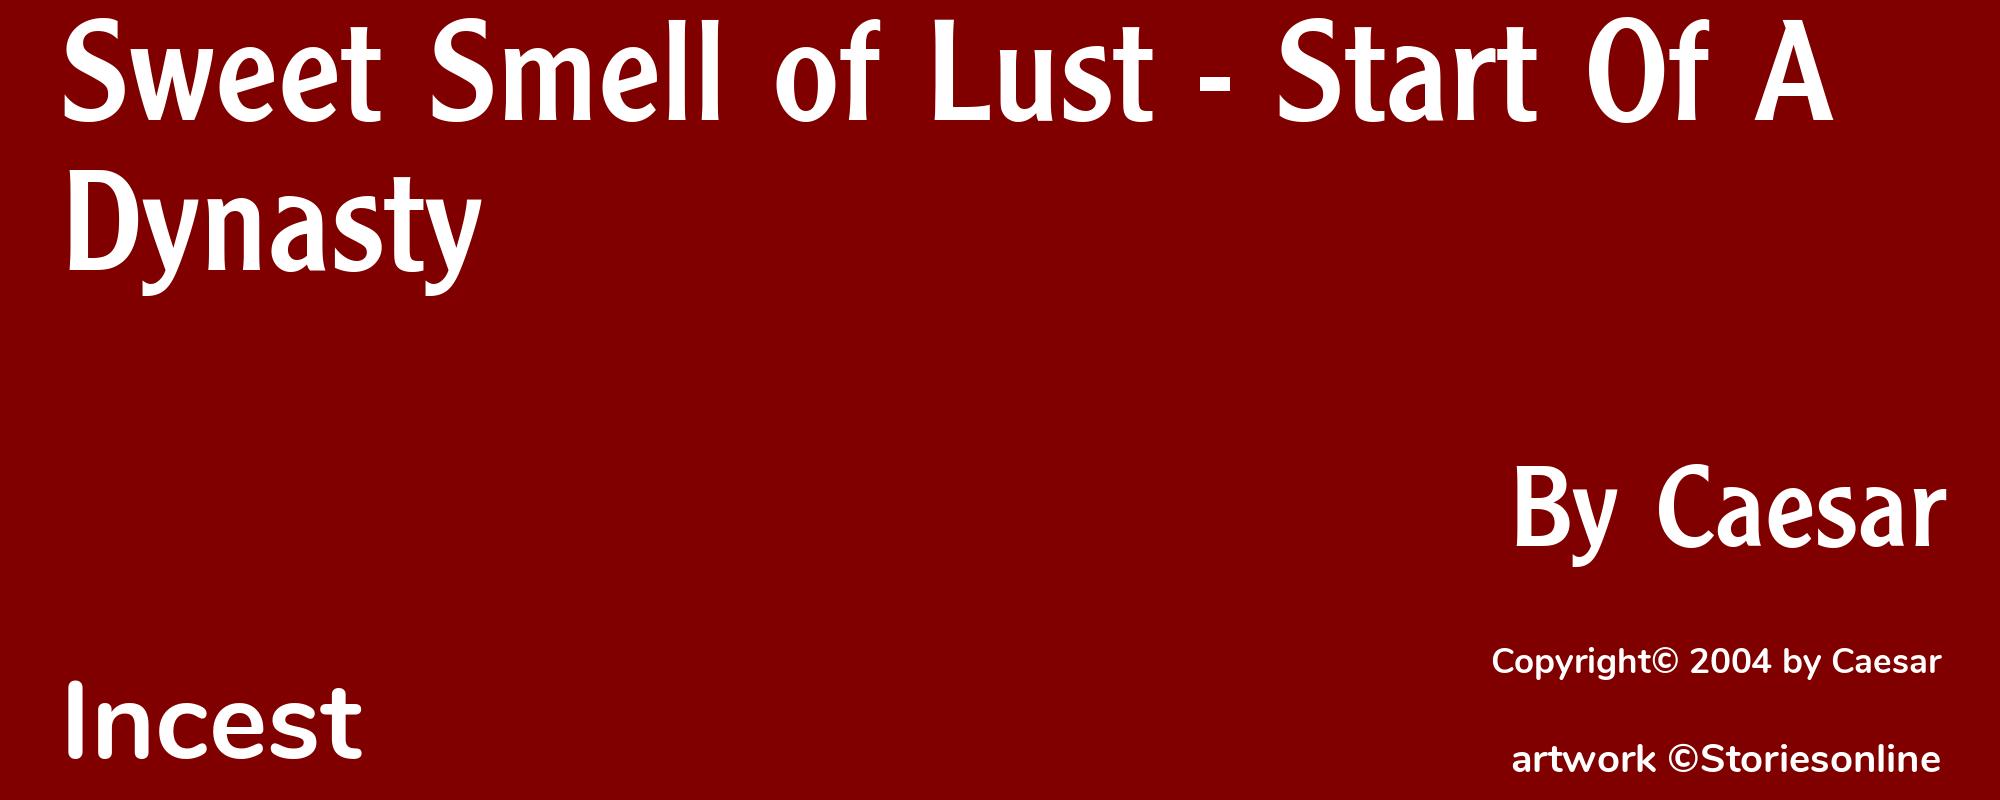 Sweet Smell of Lust - Start Of A Dynasty - Cover